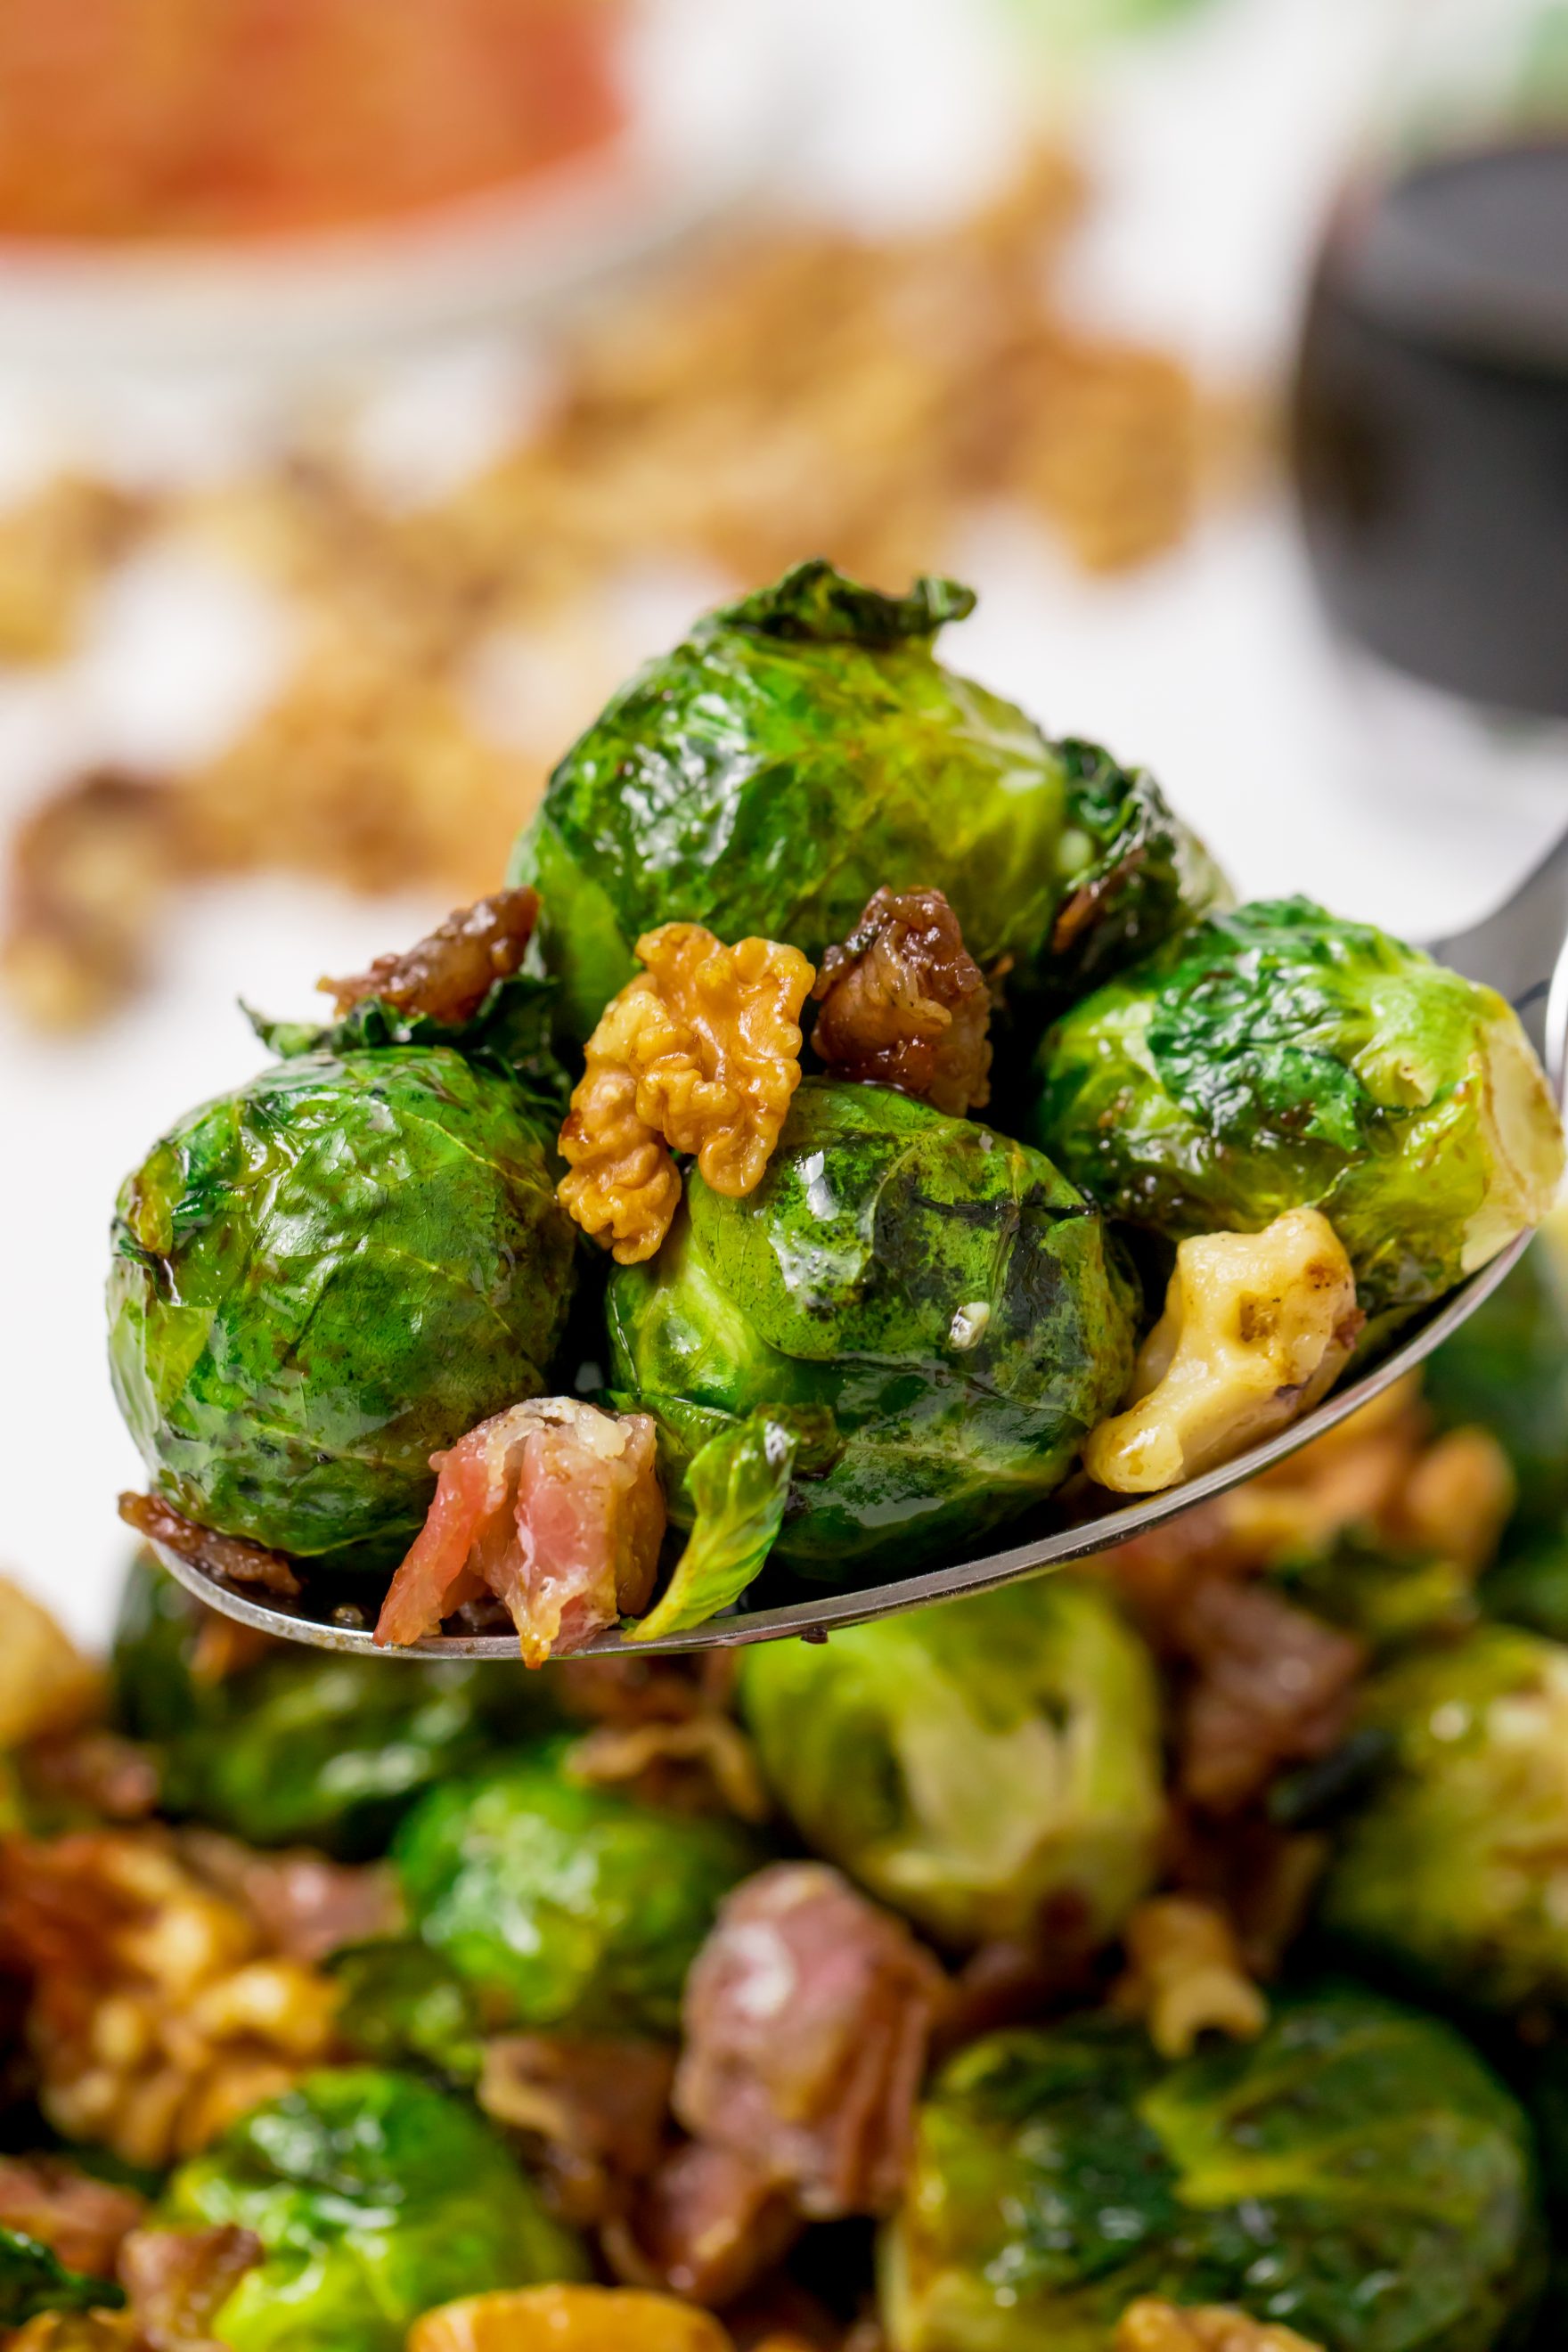 These copycat Ina Garten balsamic glazed Brussels sprouts will win over